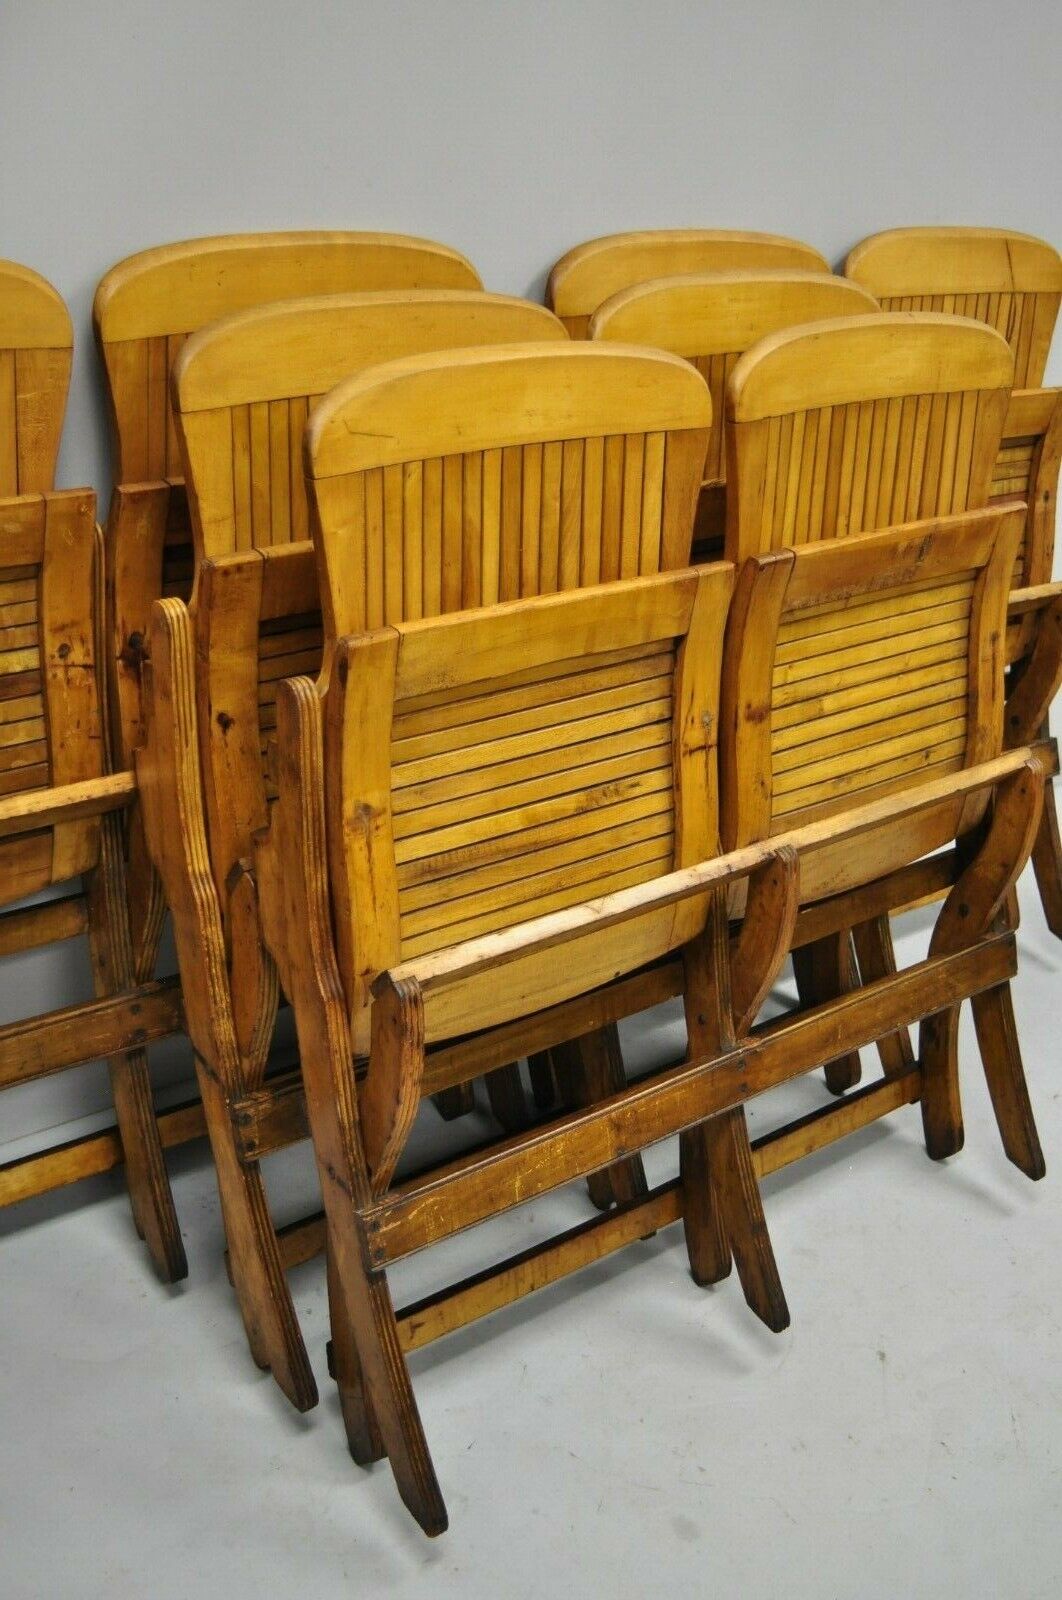 Antique Vintage Wood Slat Double Folding Seat Theater School Old Pew Chair Bench